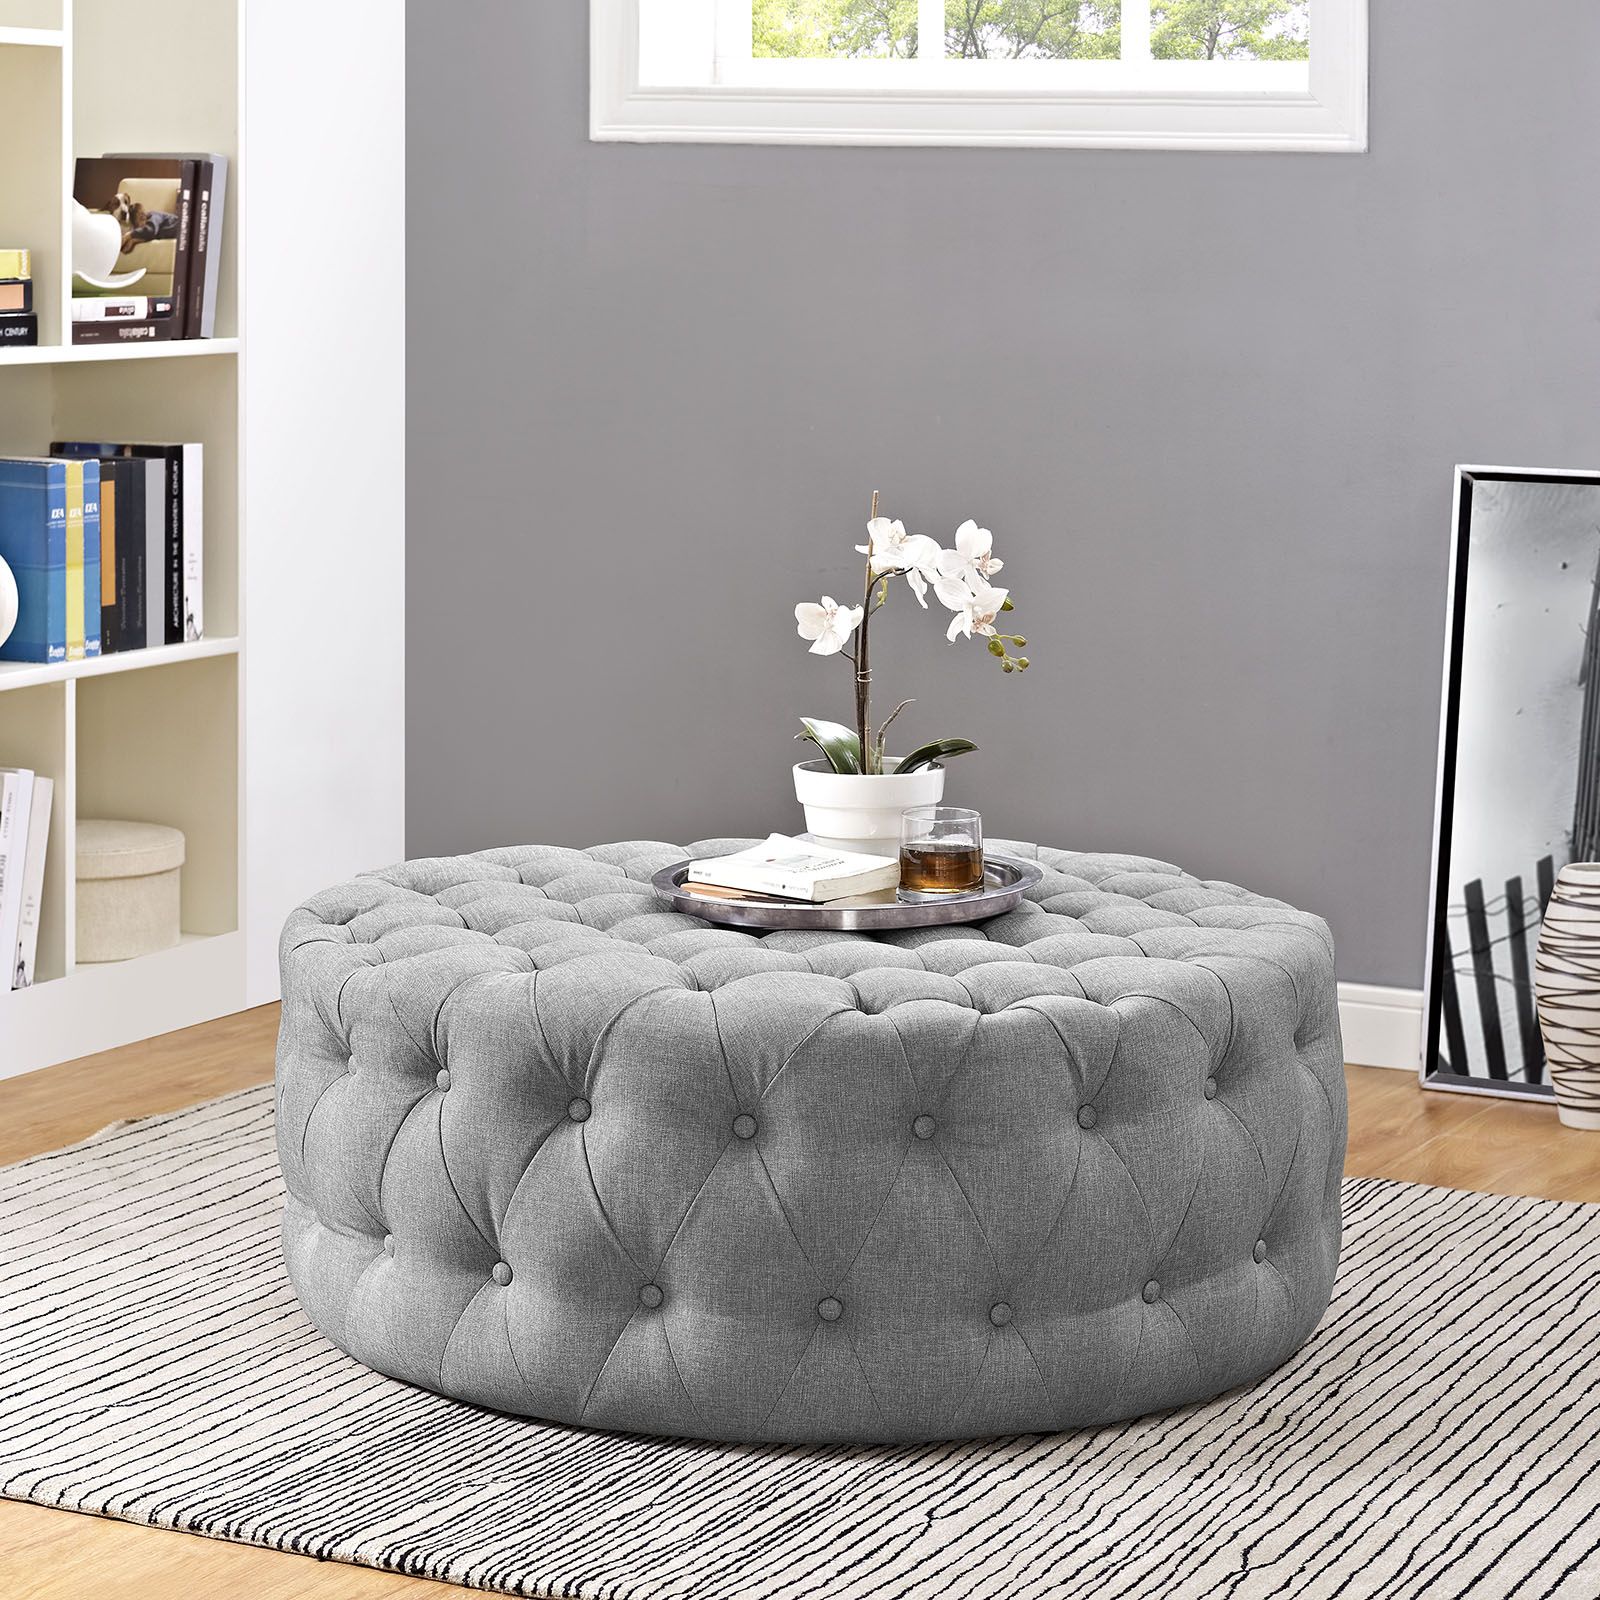 Amour Upholstered Fabric Ottoman Light Gray Intended For Light Gray Cylinder Pouf Ottomans (View 2 of 20)